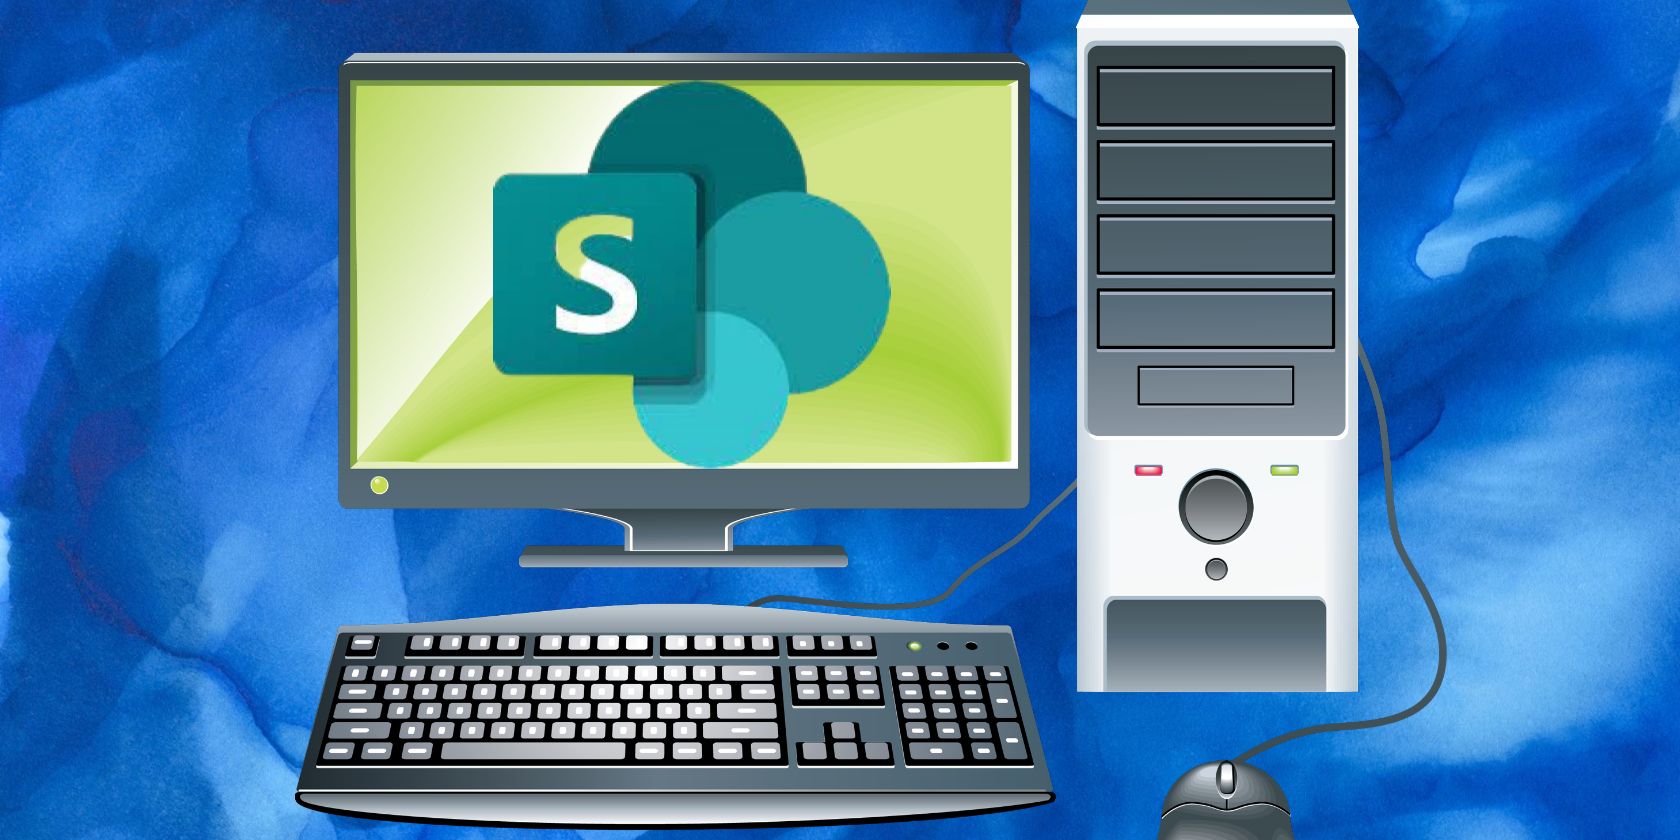 An image showing computer and SharePoint logo